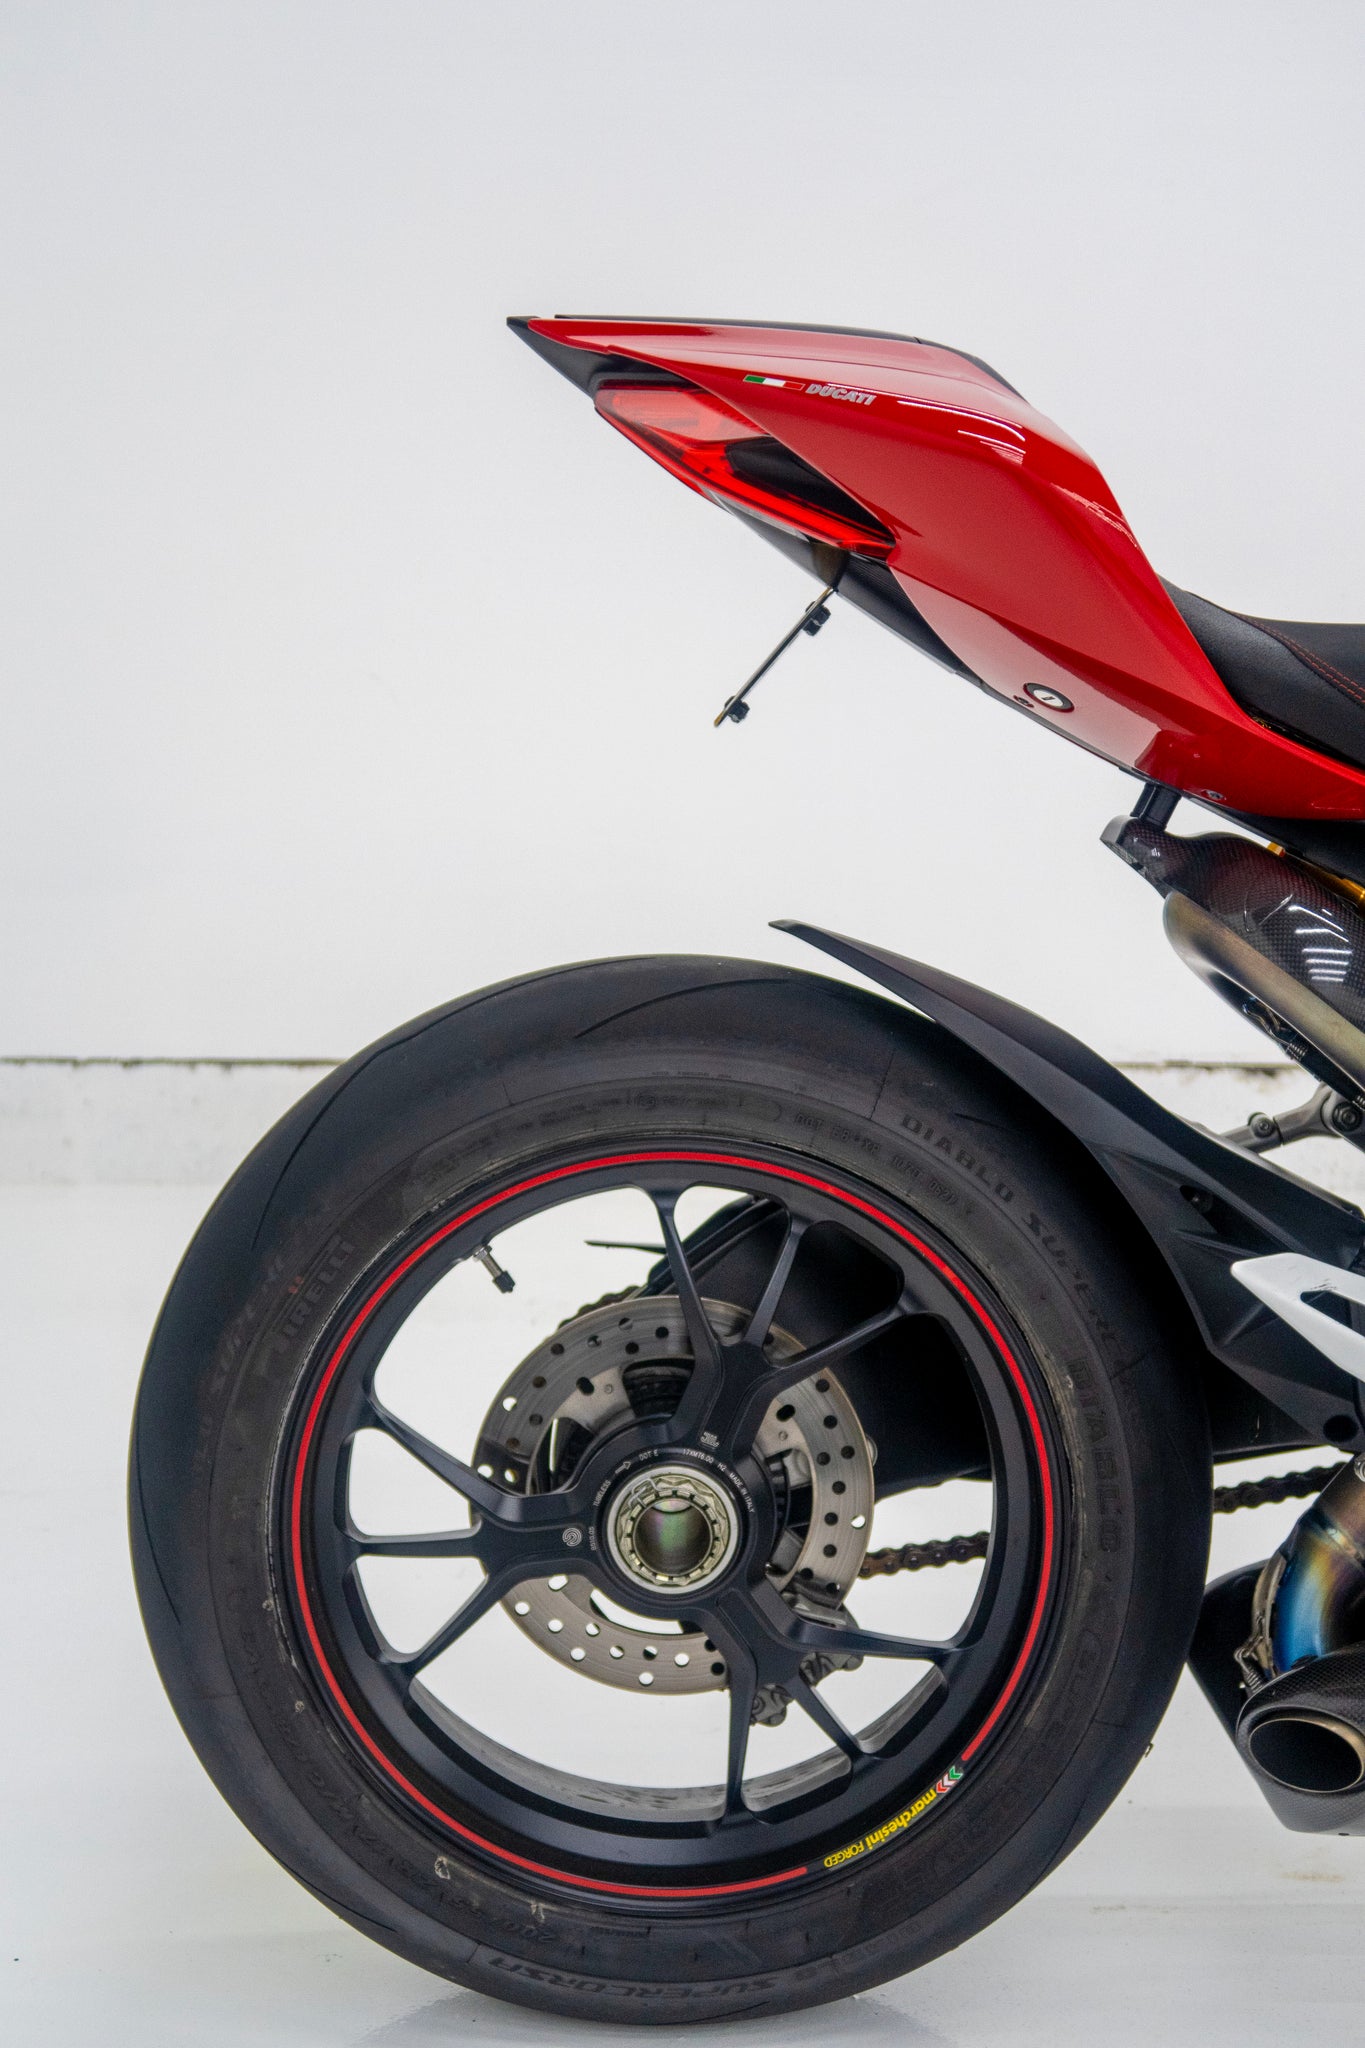 1299/1199/959/899 Panigale Tail Tidy